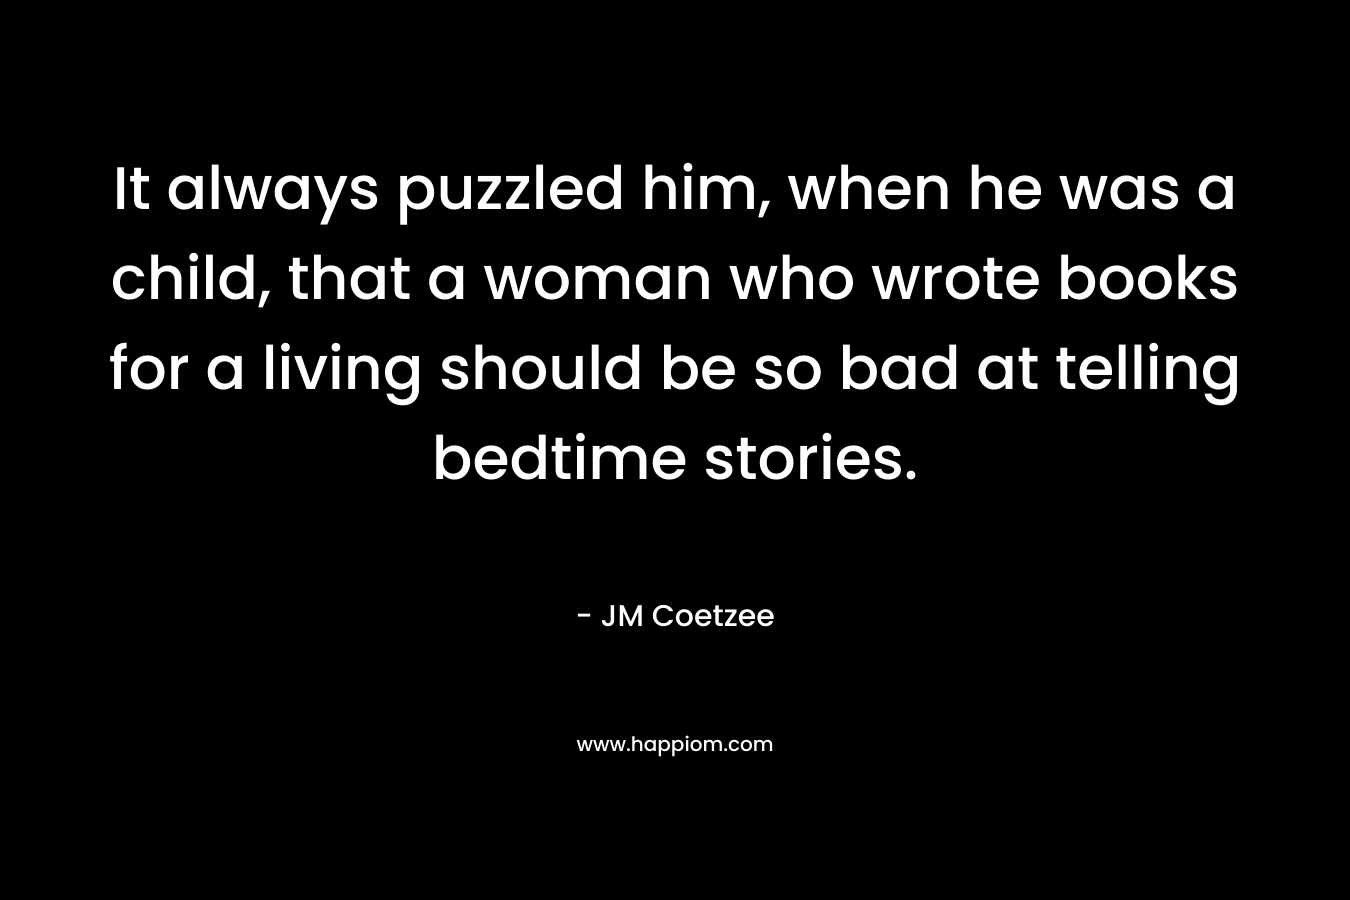 It always puzzled him, when he was a child, that a woman who wrote books for a living should be so bad at telling bedtime stories.